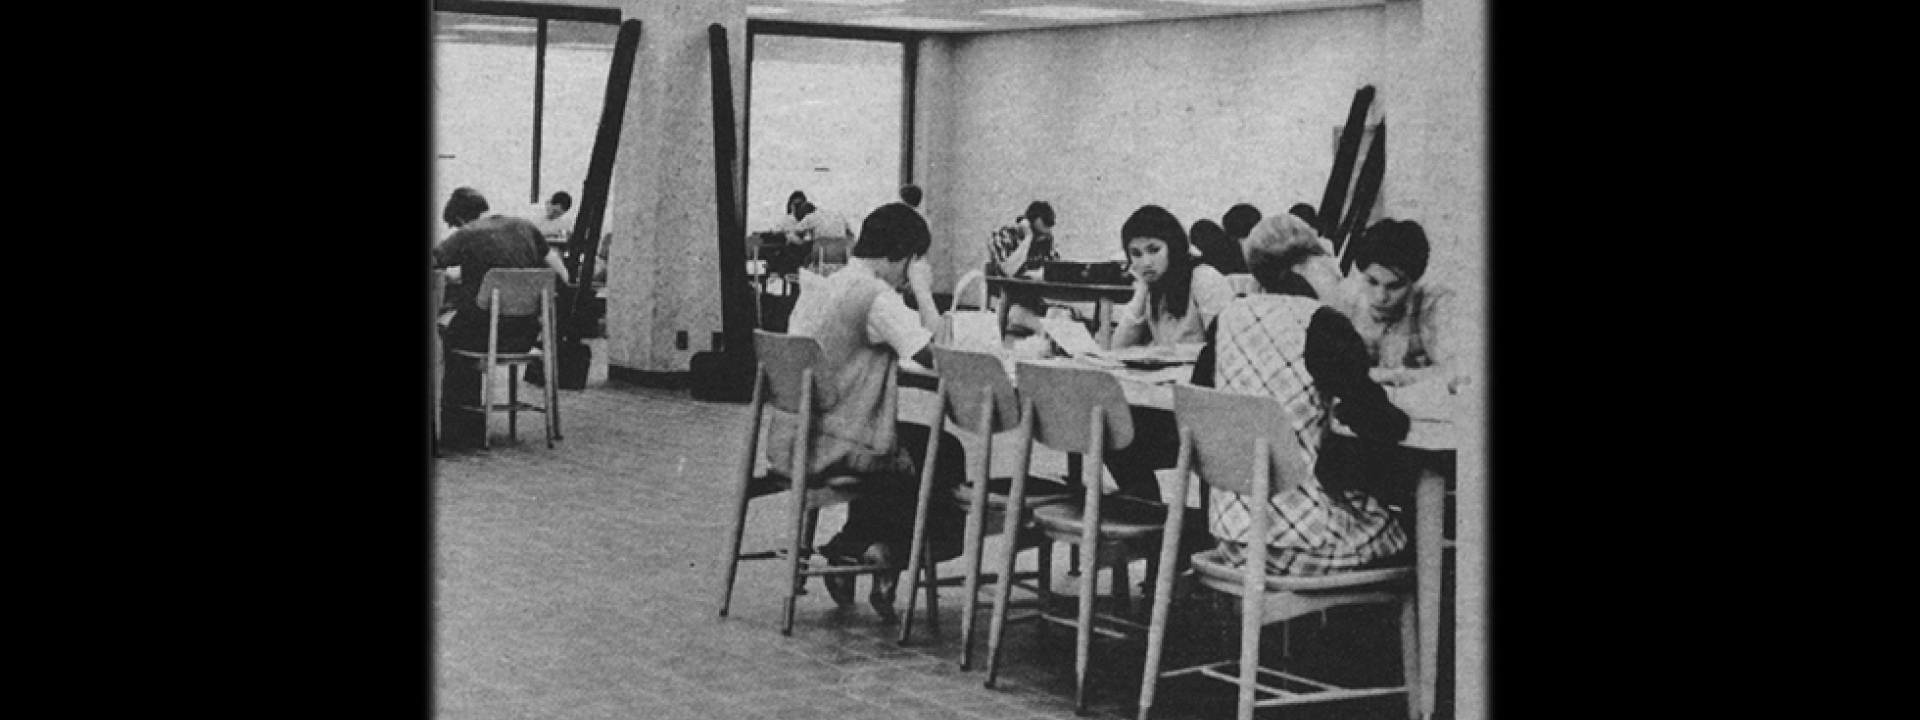 Students in the Cal State LA library in the 1960s